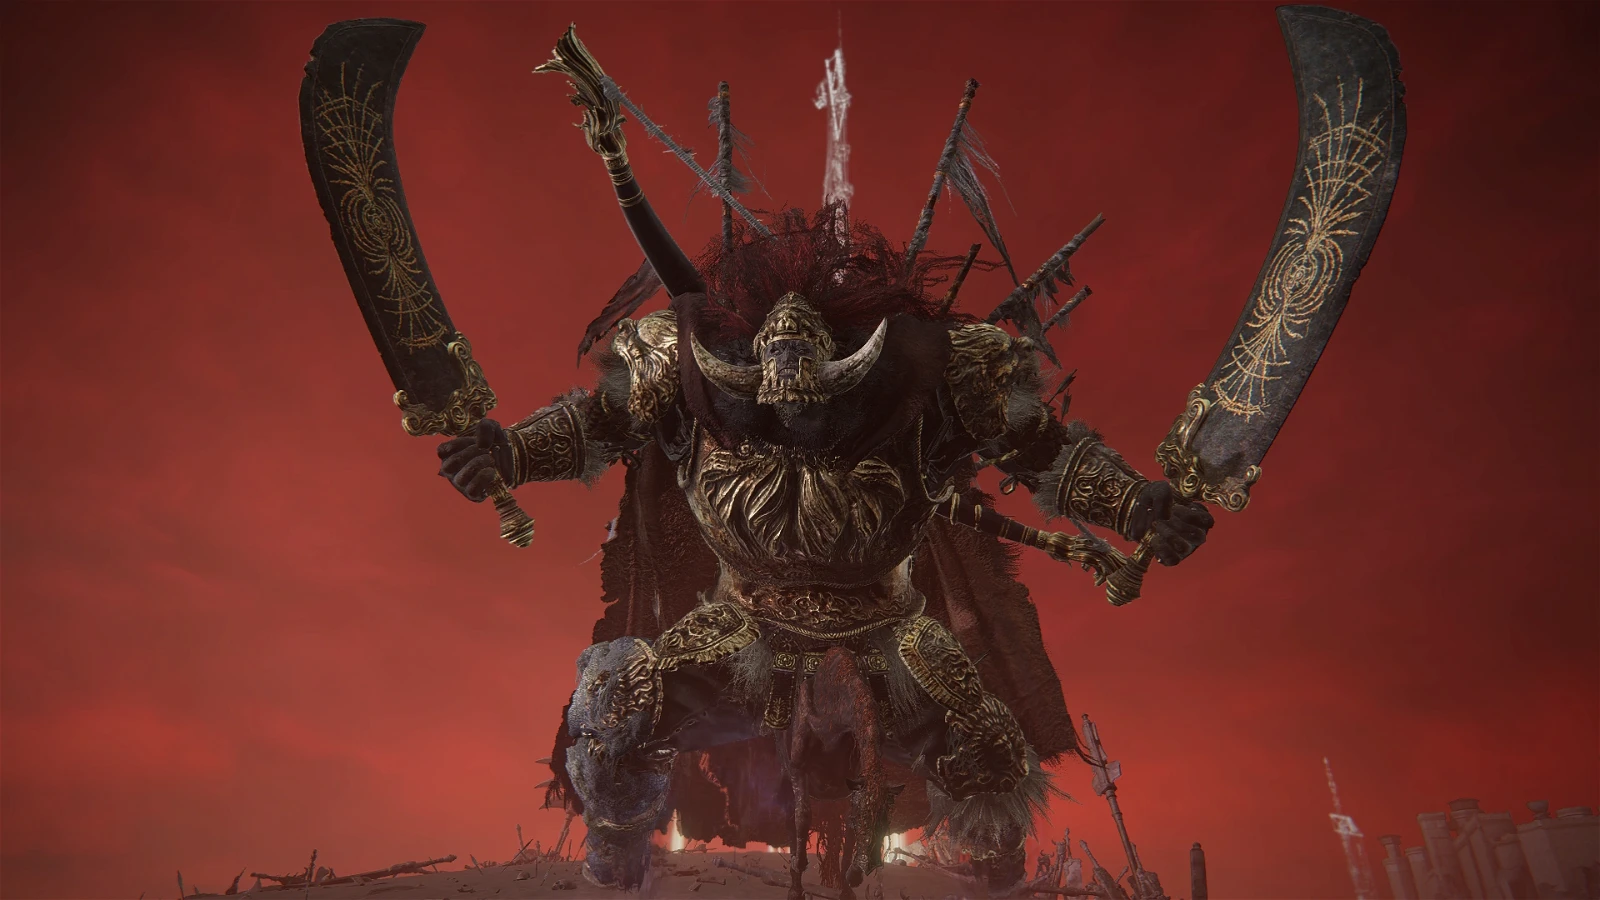 There are a lot of unique enemies that the player gets to fight in Elden Ring | A still from the battle with Starscourge Radahn